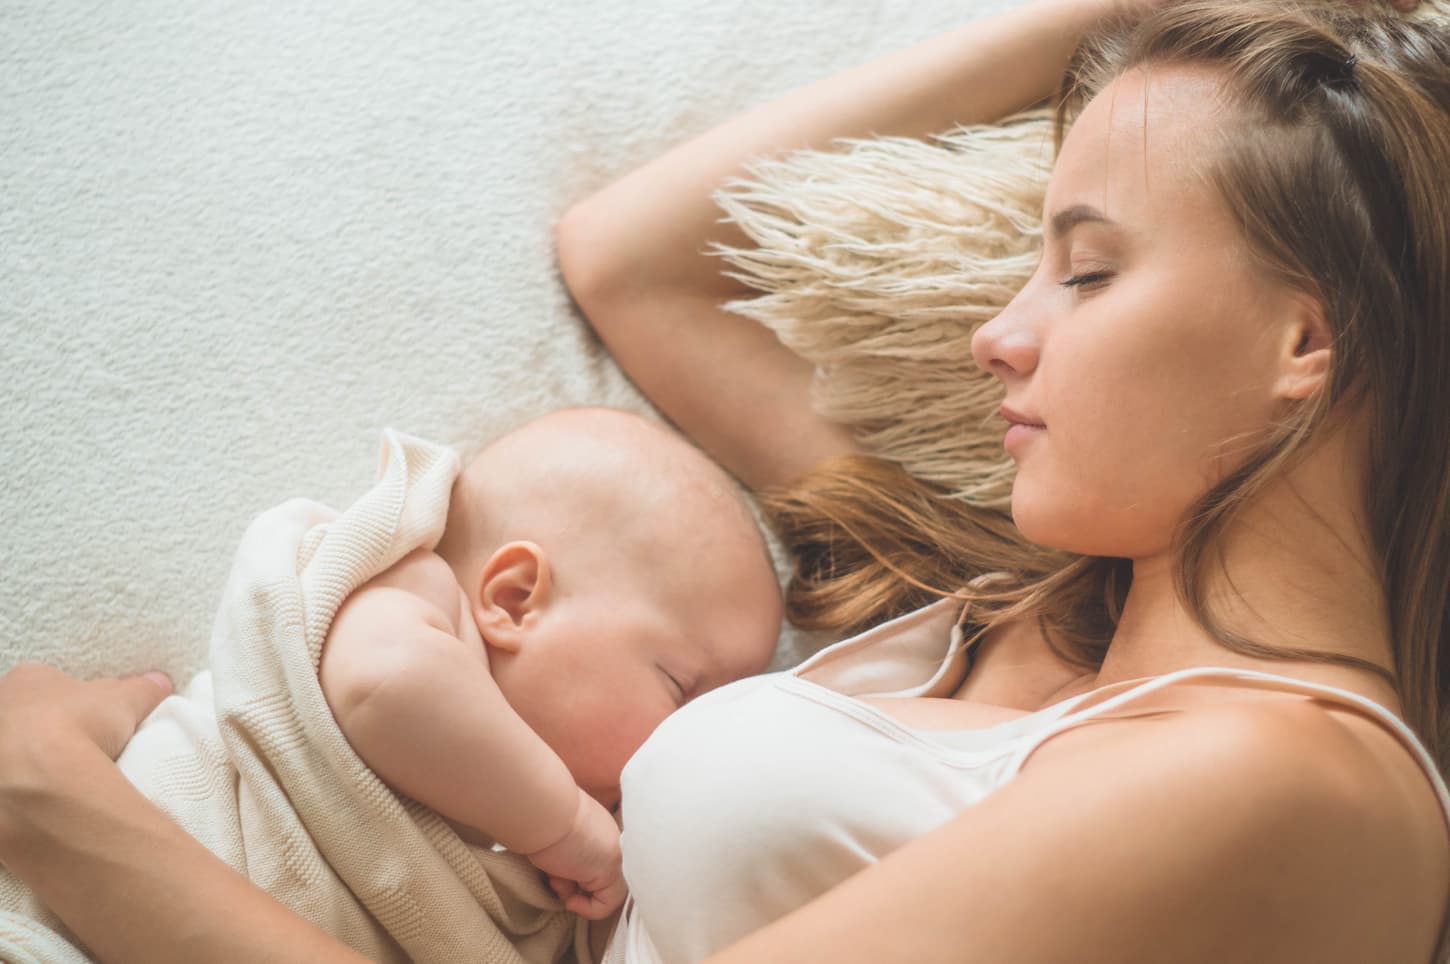 An image of a mom taking a nap while breastfeeding her baby on the bed.